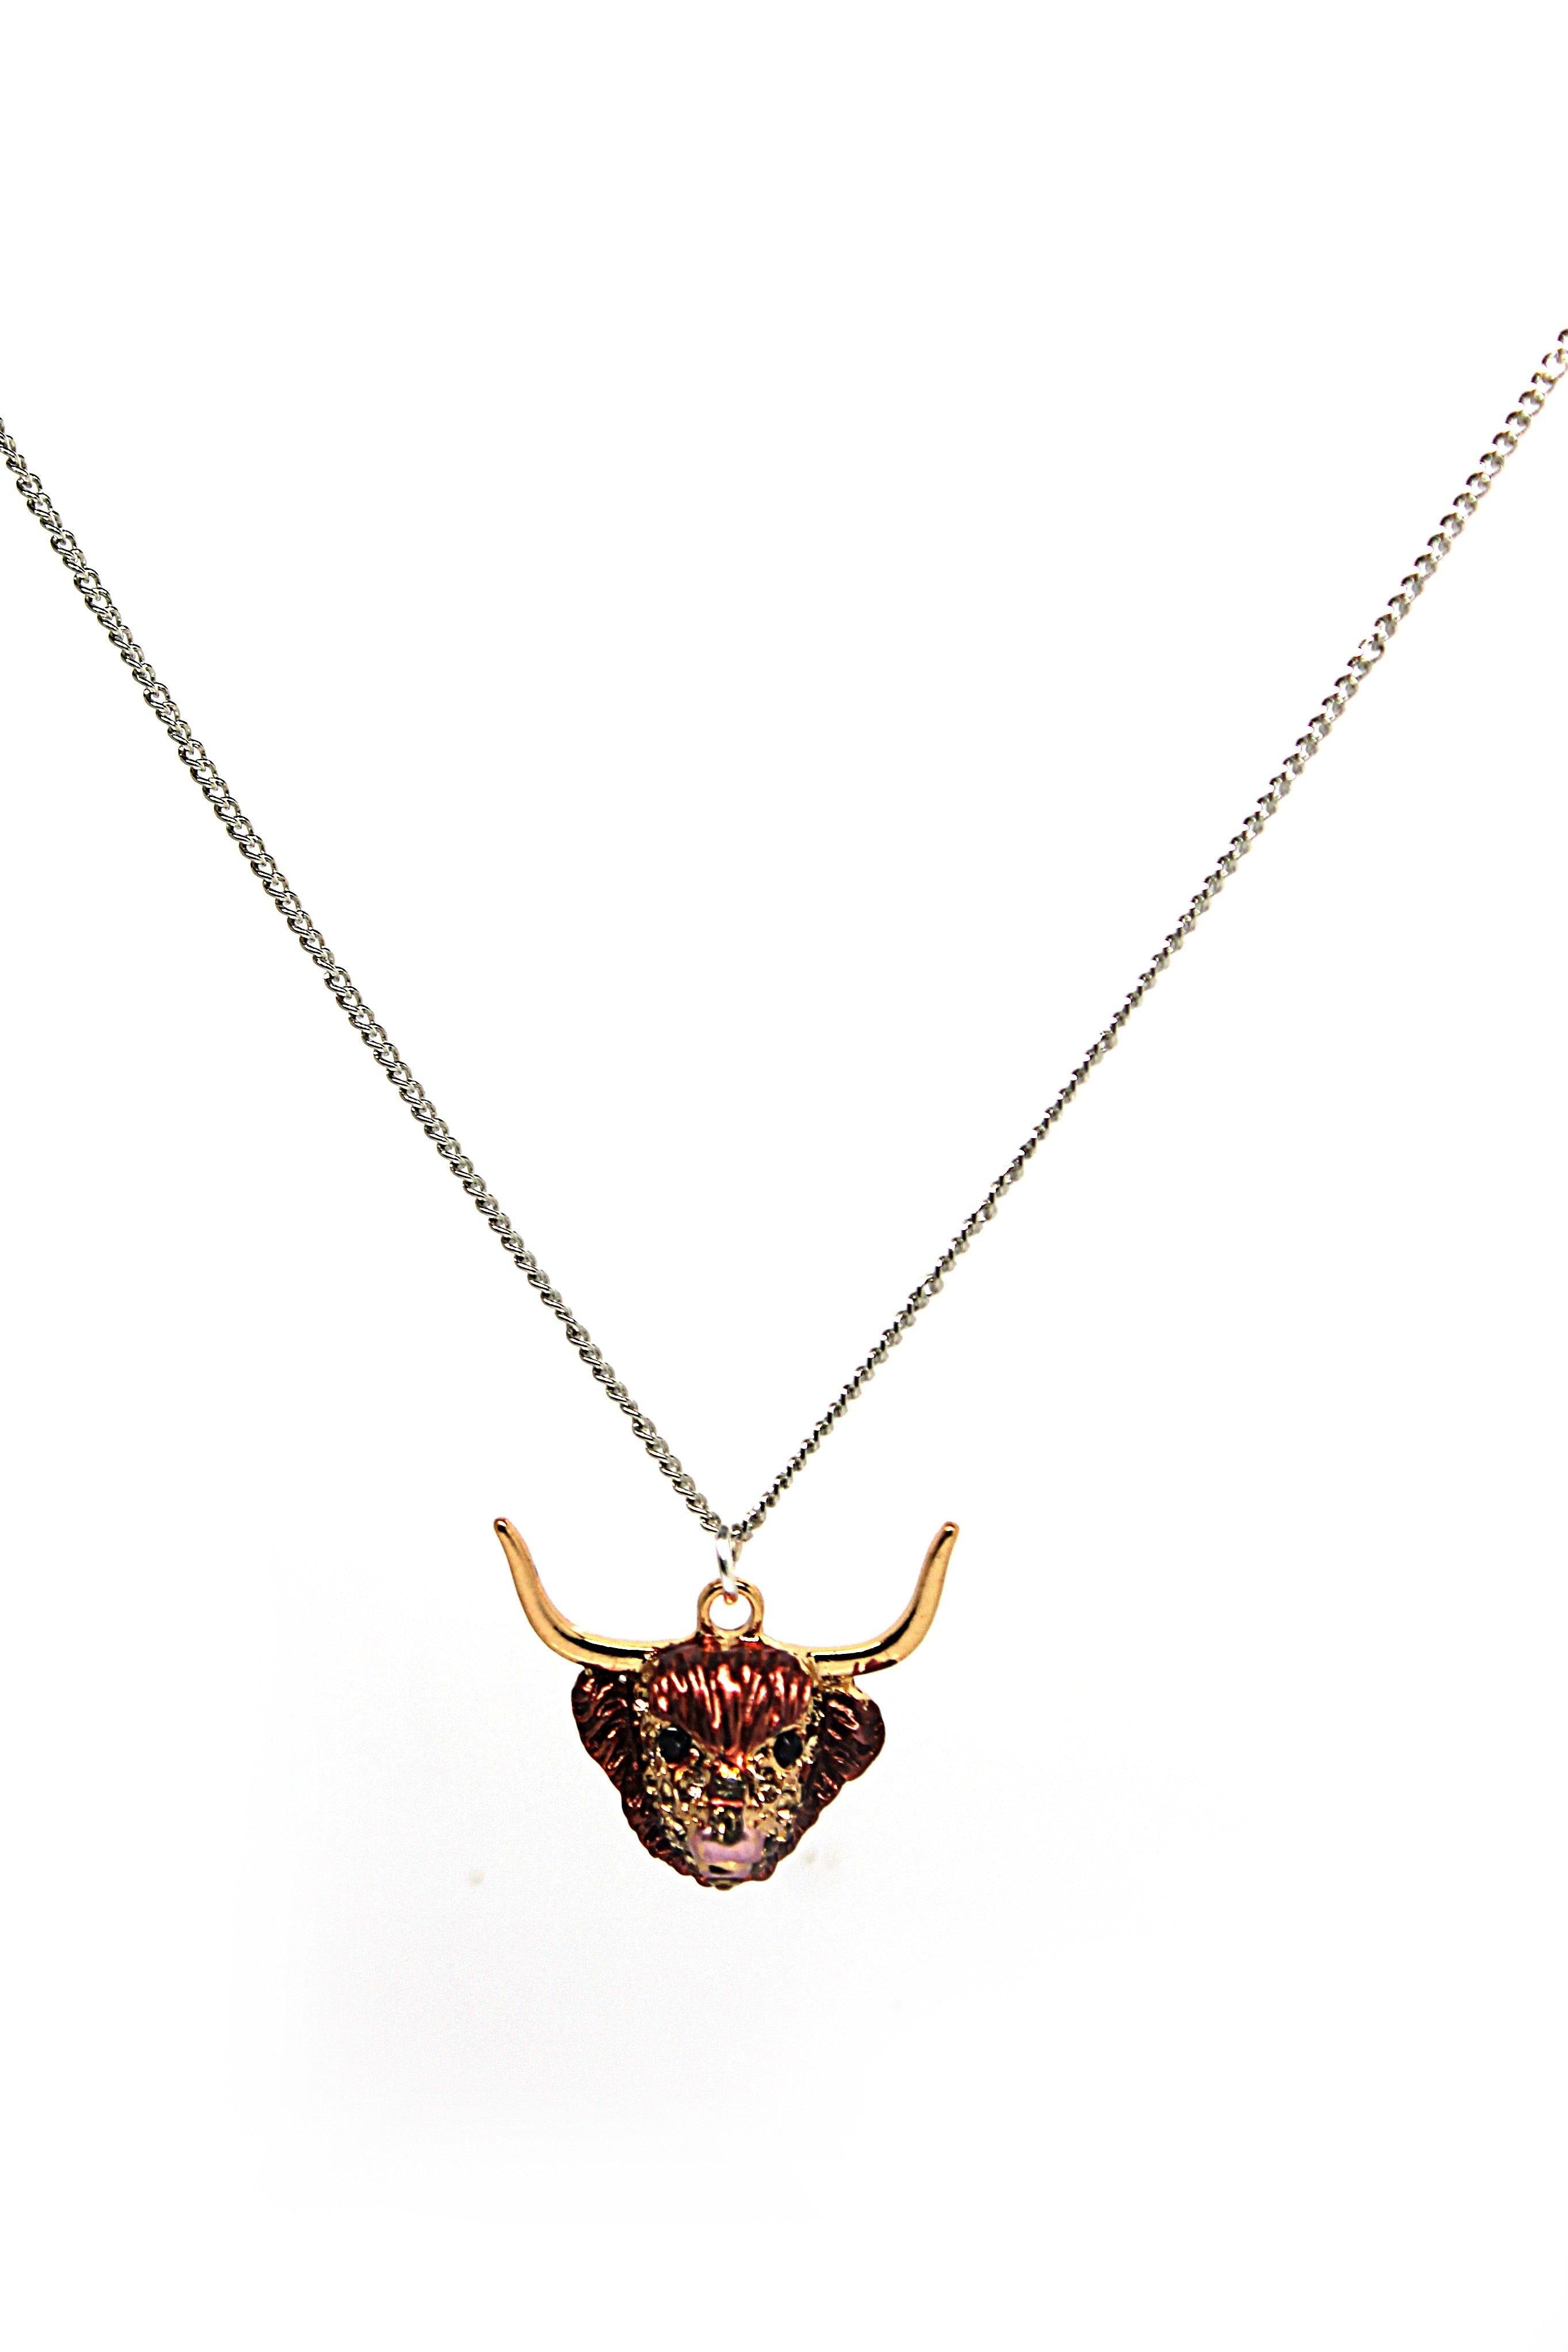 Highland Cow Necklace - Wildtouch - Wildtouch